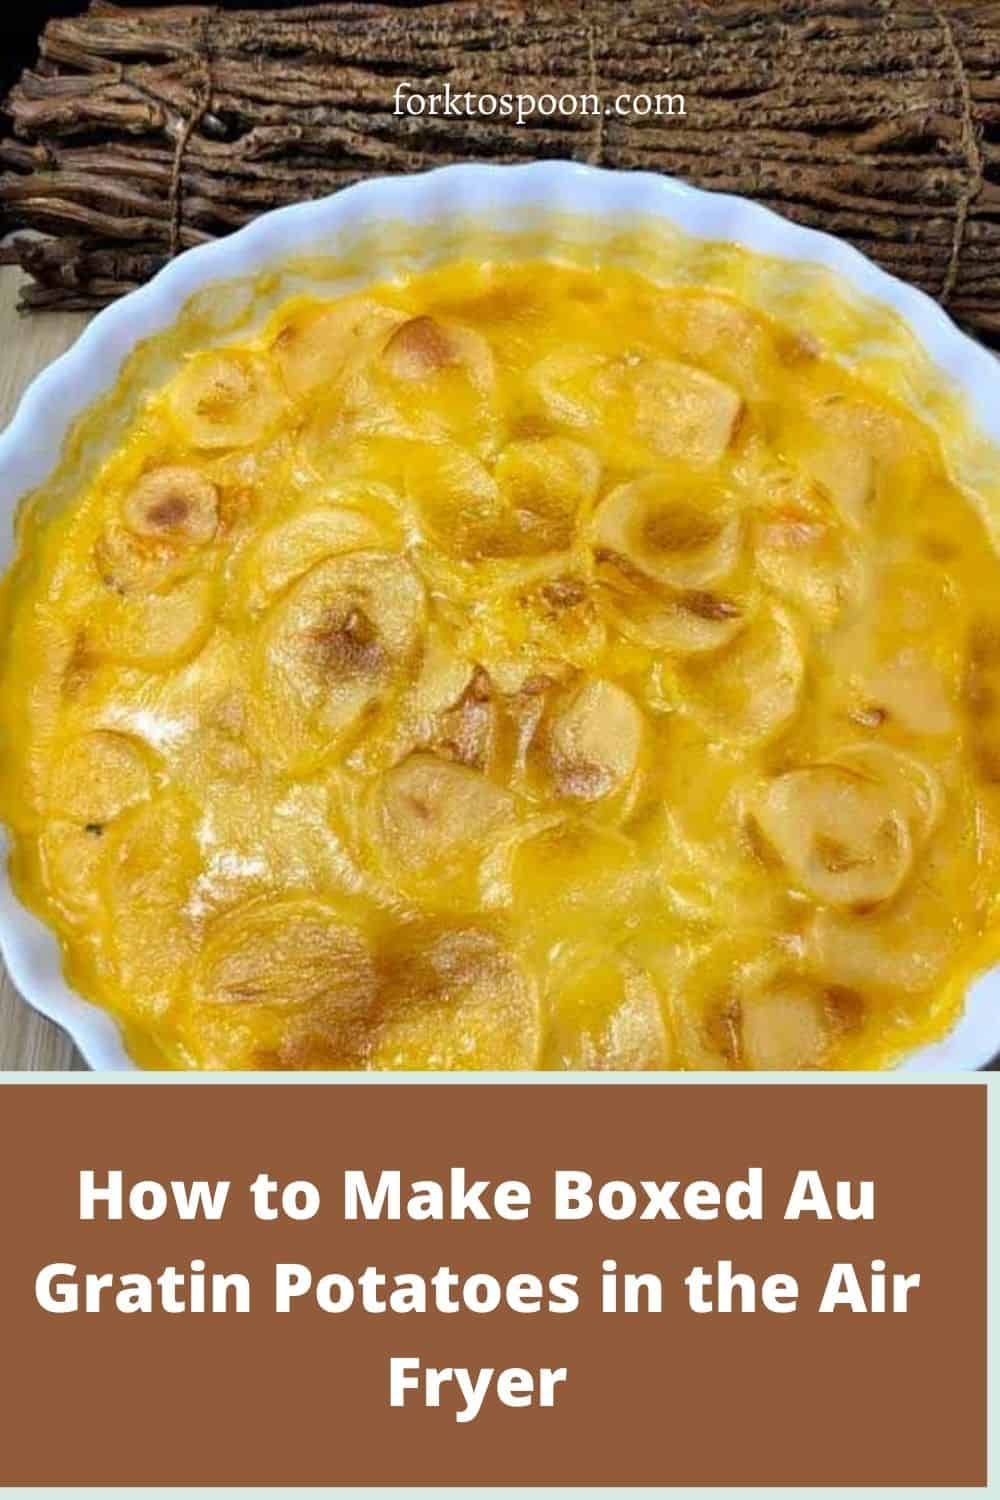 https://forktospoon.com/wp-content/uploads/2021/09/How-to-Make-Boxed-Au-Gratin-Potatoes-in-the-Air-Fryer-2-1.jpg